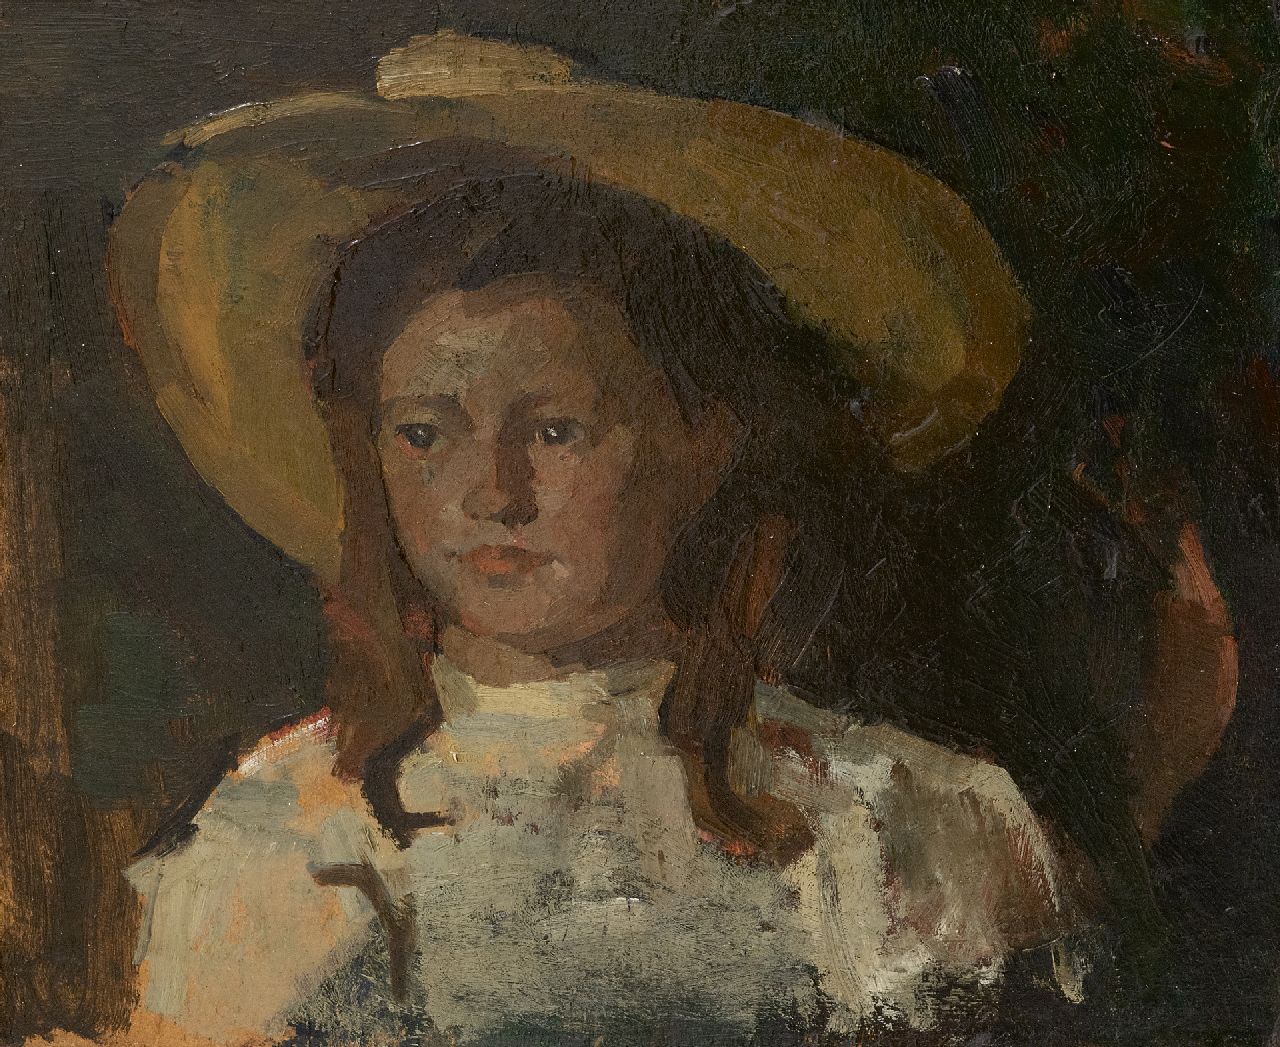 Fritzlin M.C.L.  | Maria Charlotta 'Louise' Fritzlin | Paintings offered for sale | Fokeltje with yellow hat, oil on board laid down on panel 31.7 x 36.7 cm, painted in 1908